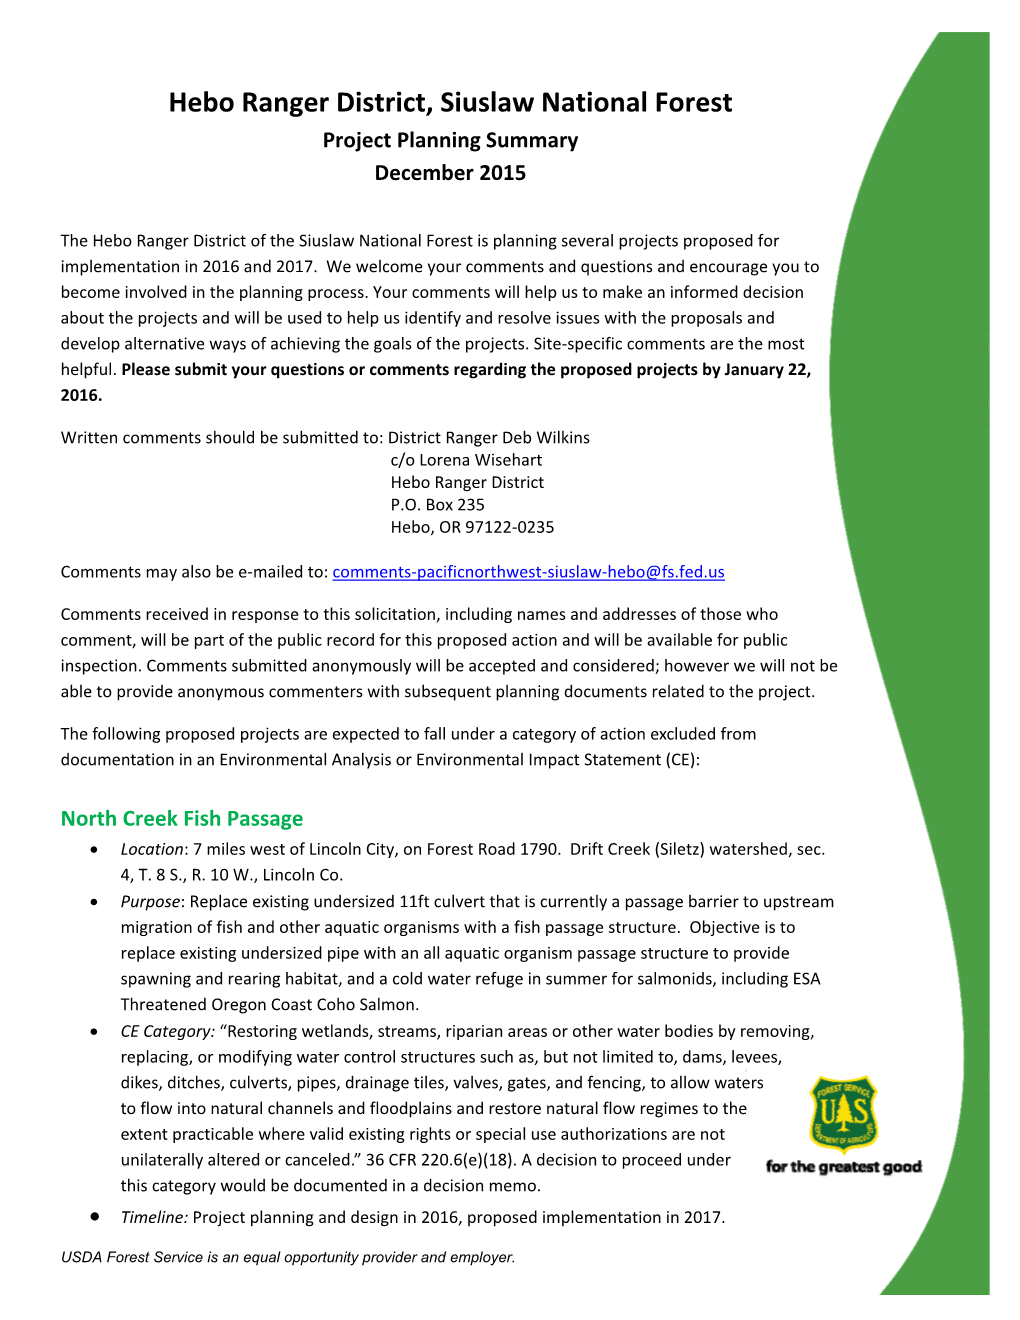 Hebo Ranger District, Siuslaw National Forest Project Planning Summary December 2015